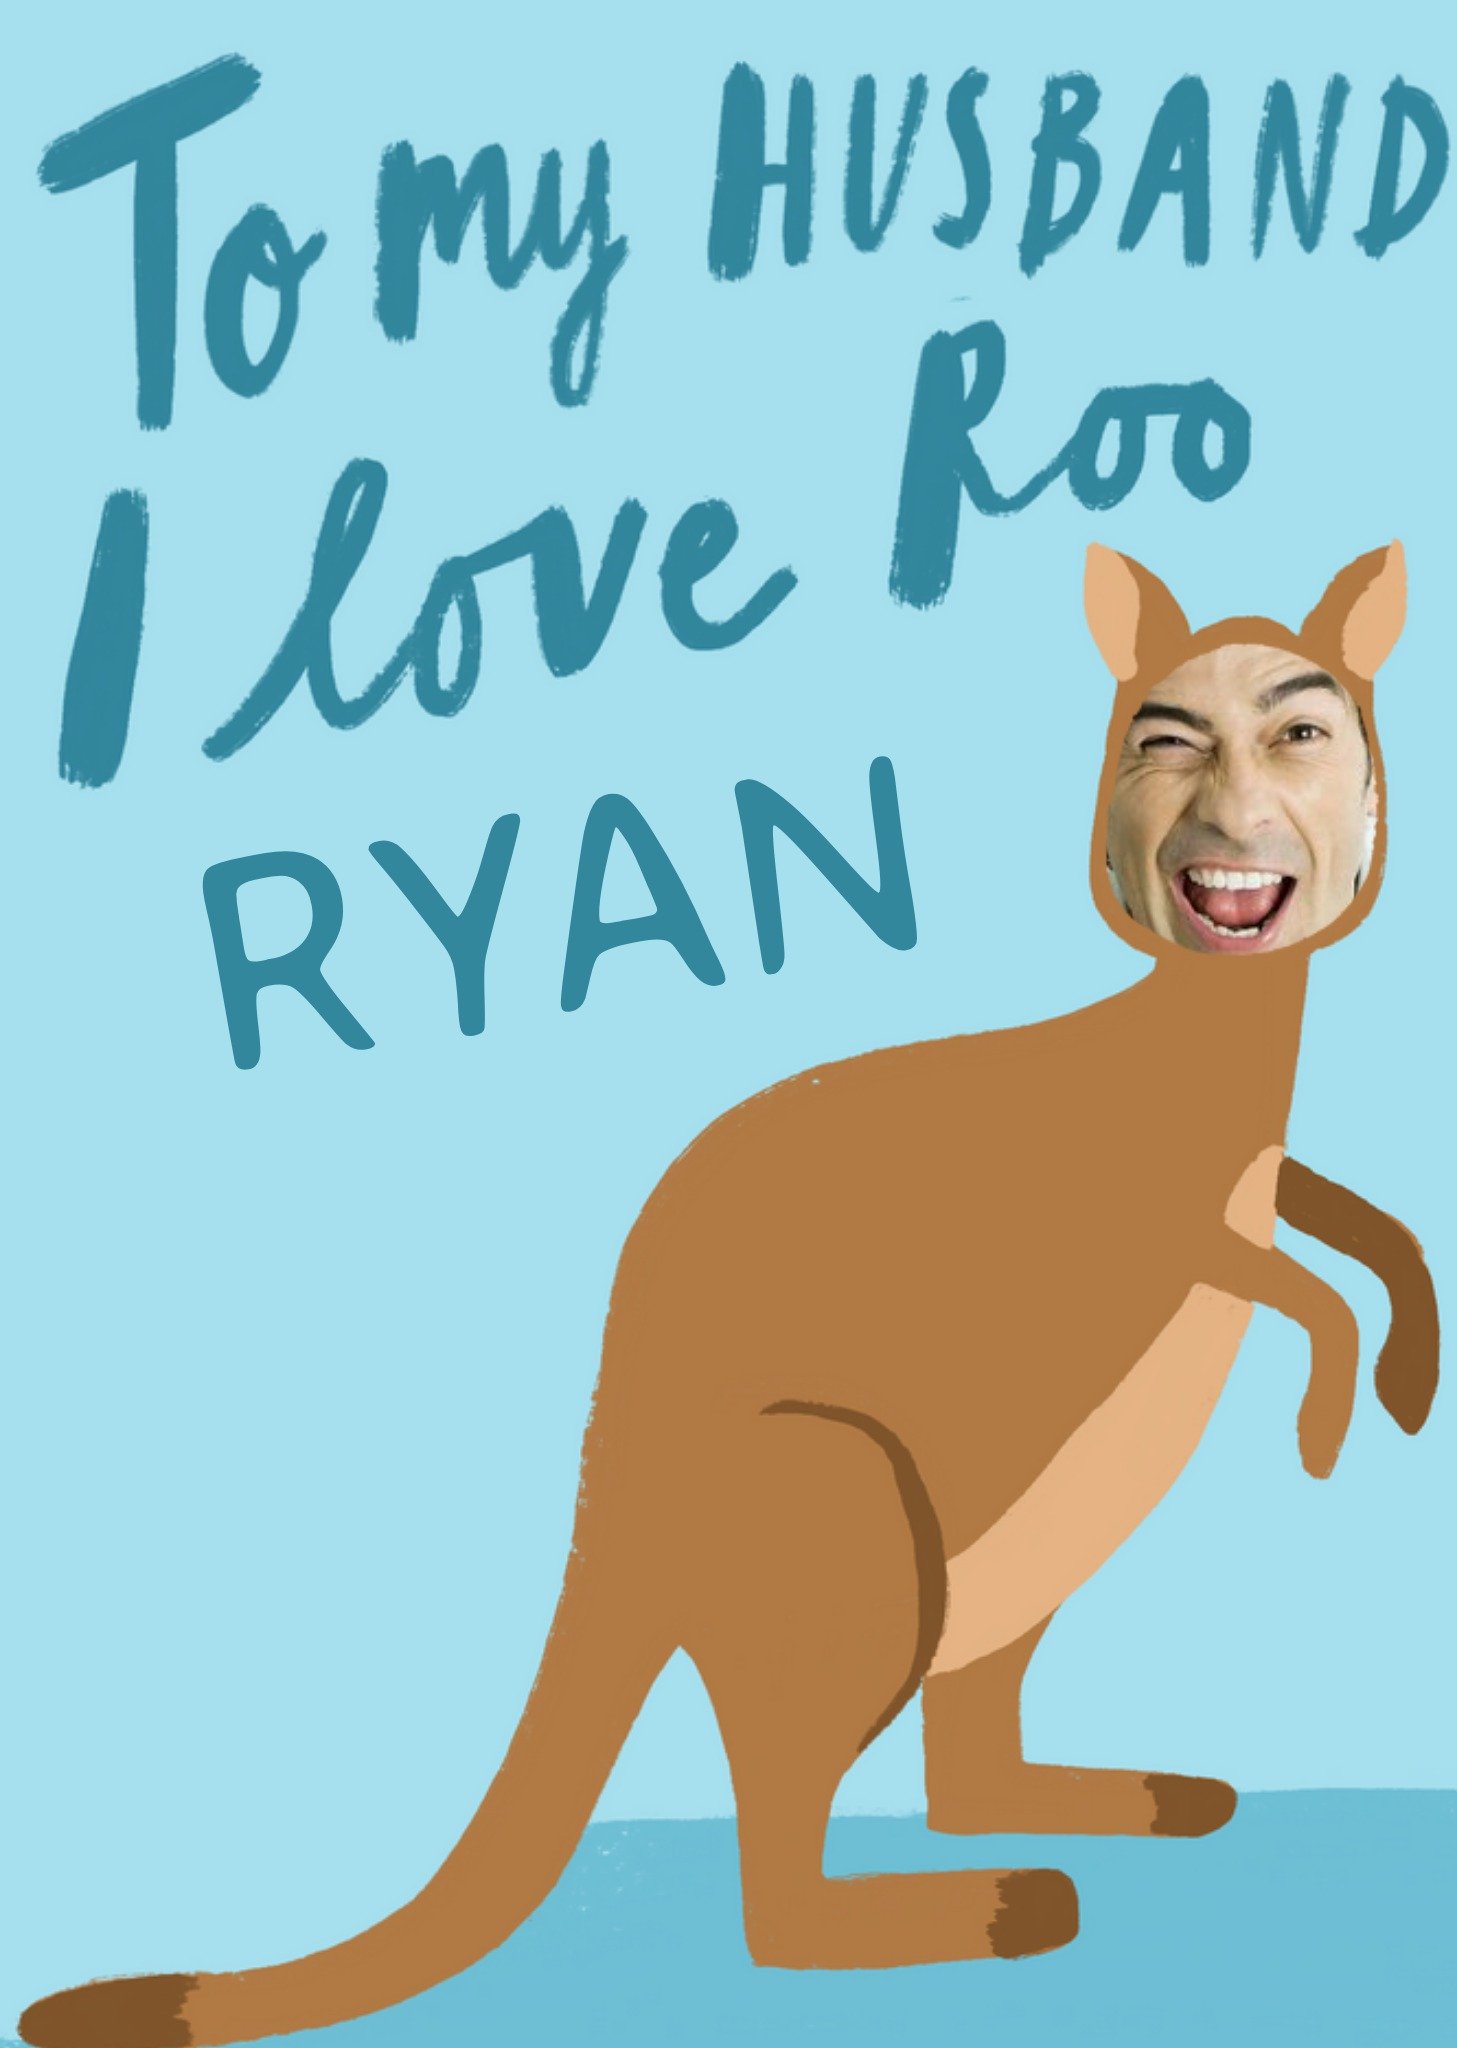 Moonpig Funny Illustration Of A Kangeroo With A Face Photo Upload Valentine's Day Card Ecard